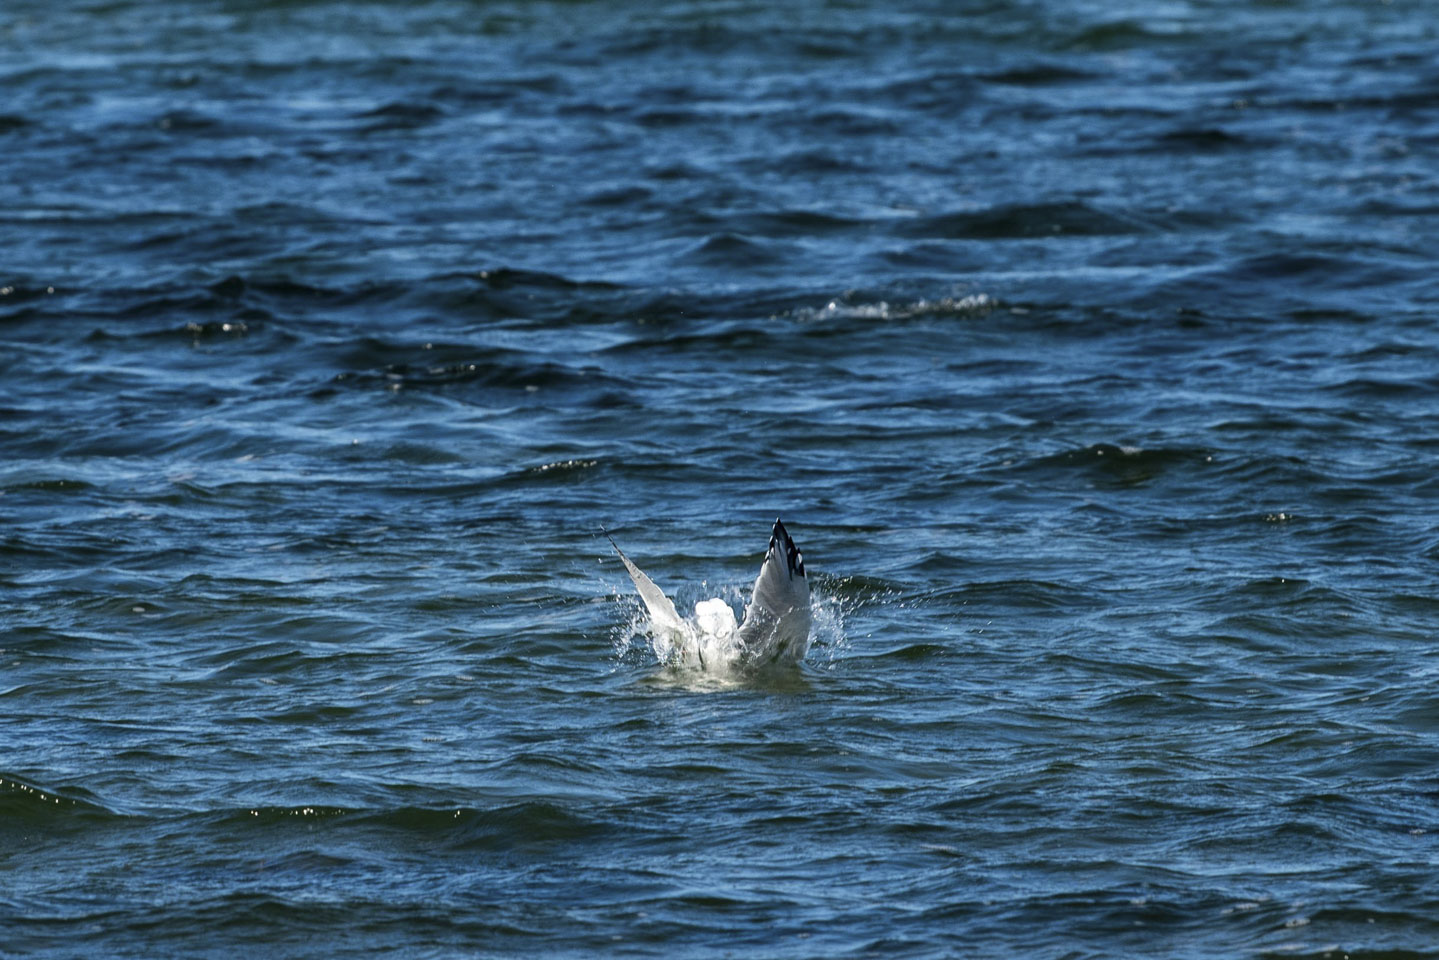 Gull partially immersed in the water